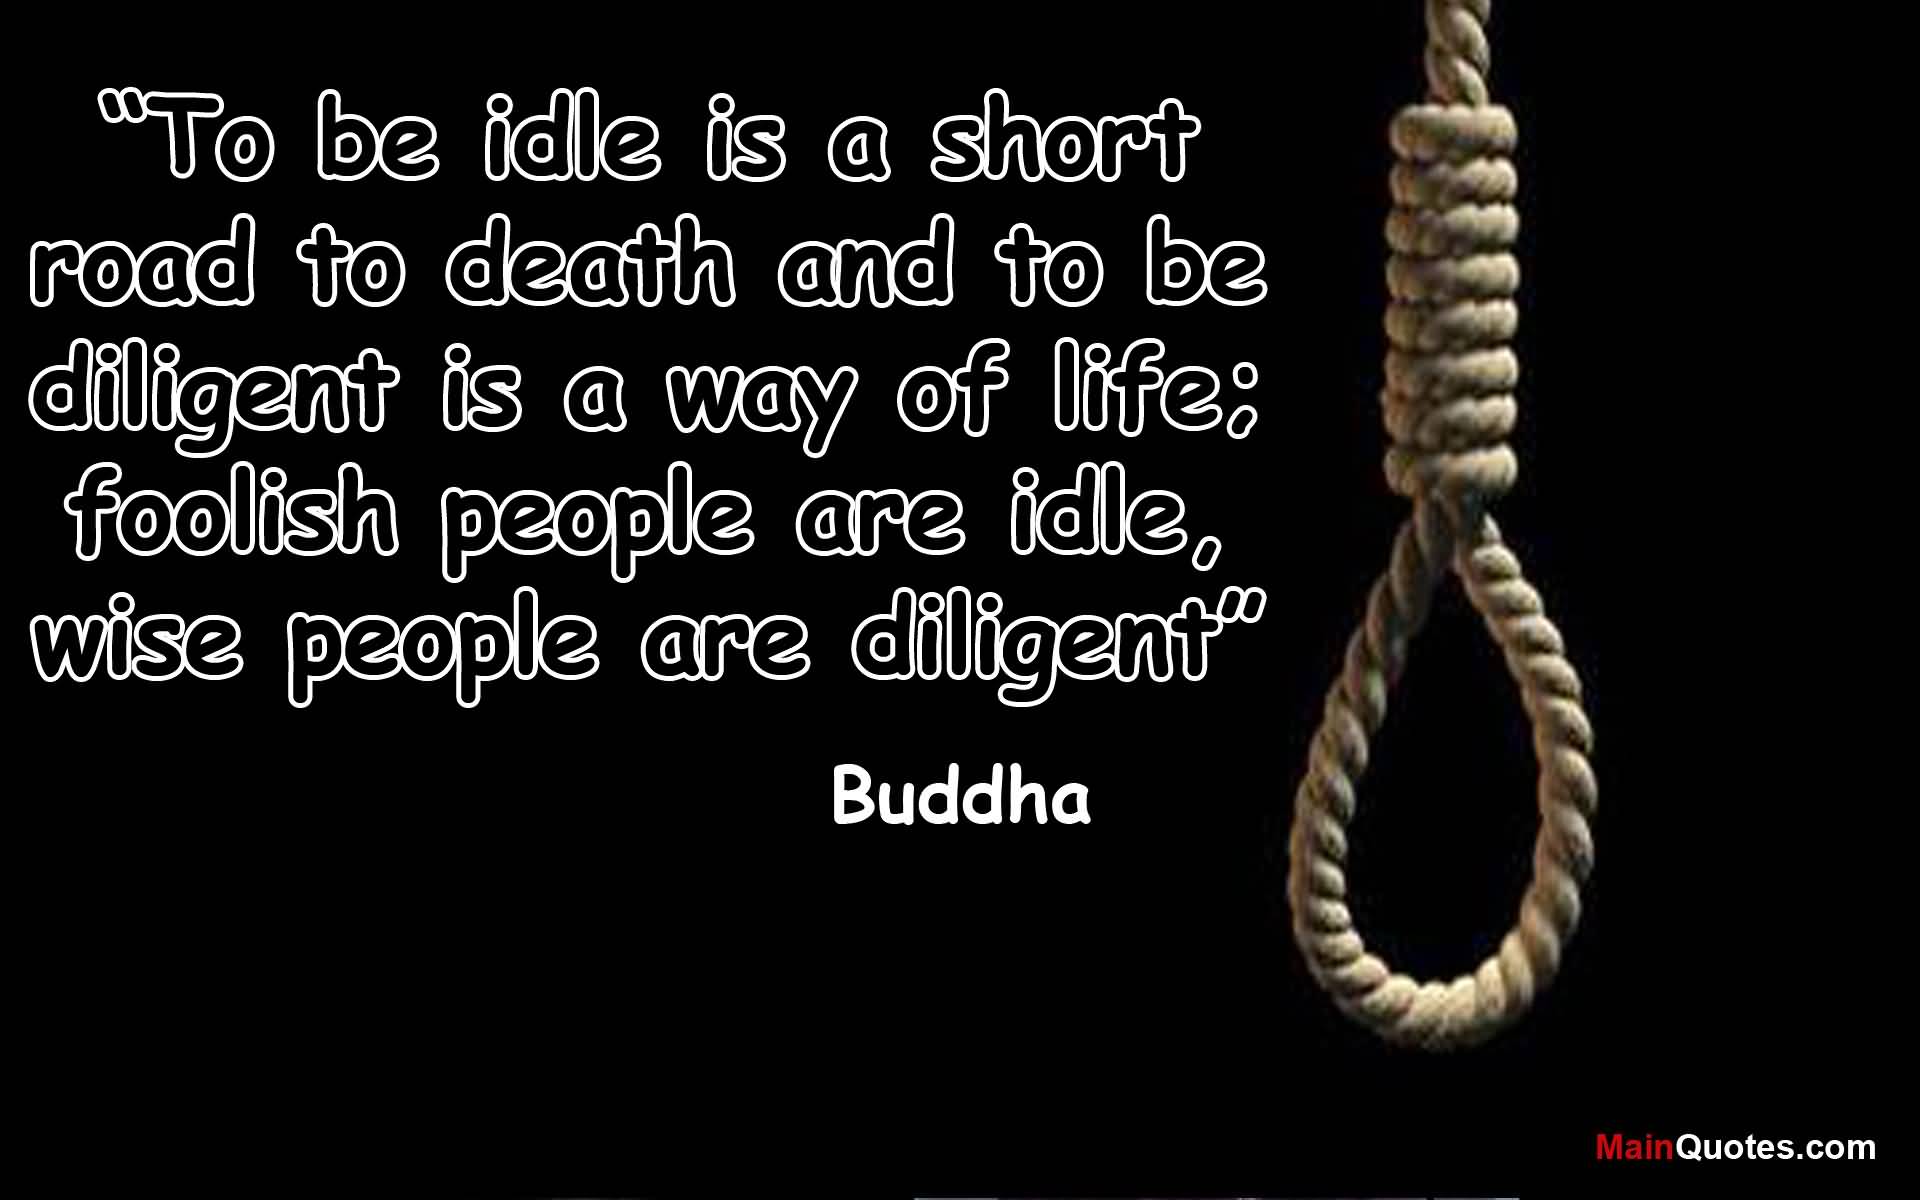 Buddha Quotes On Death And Life 15